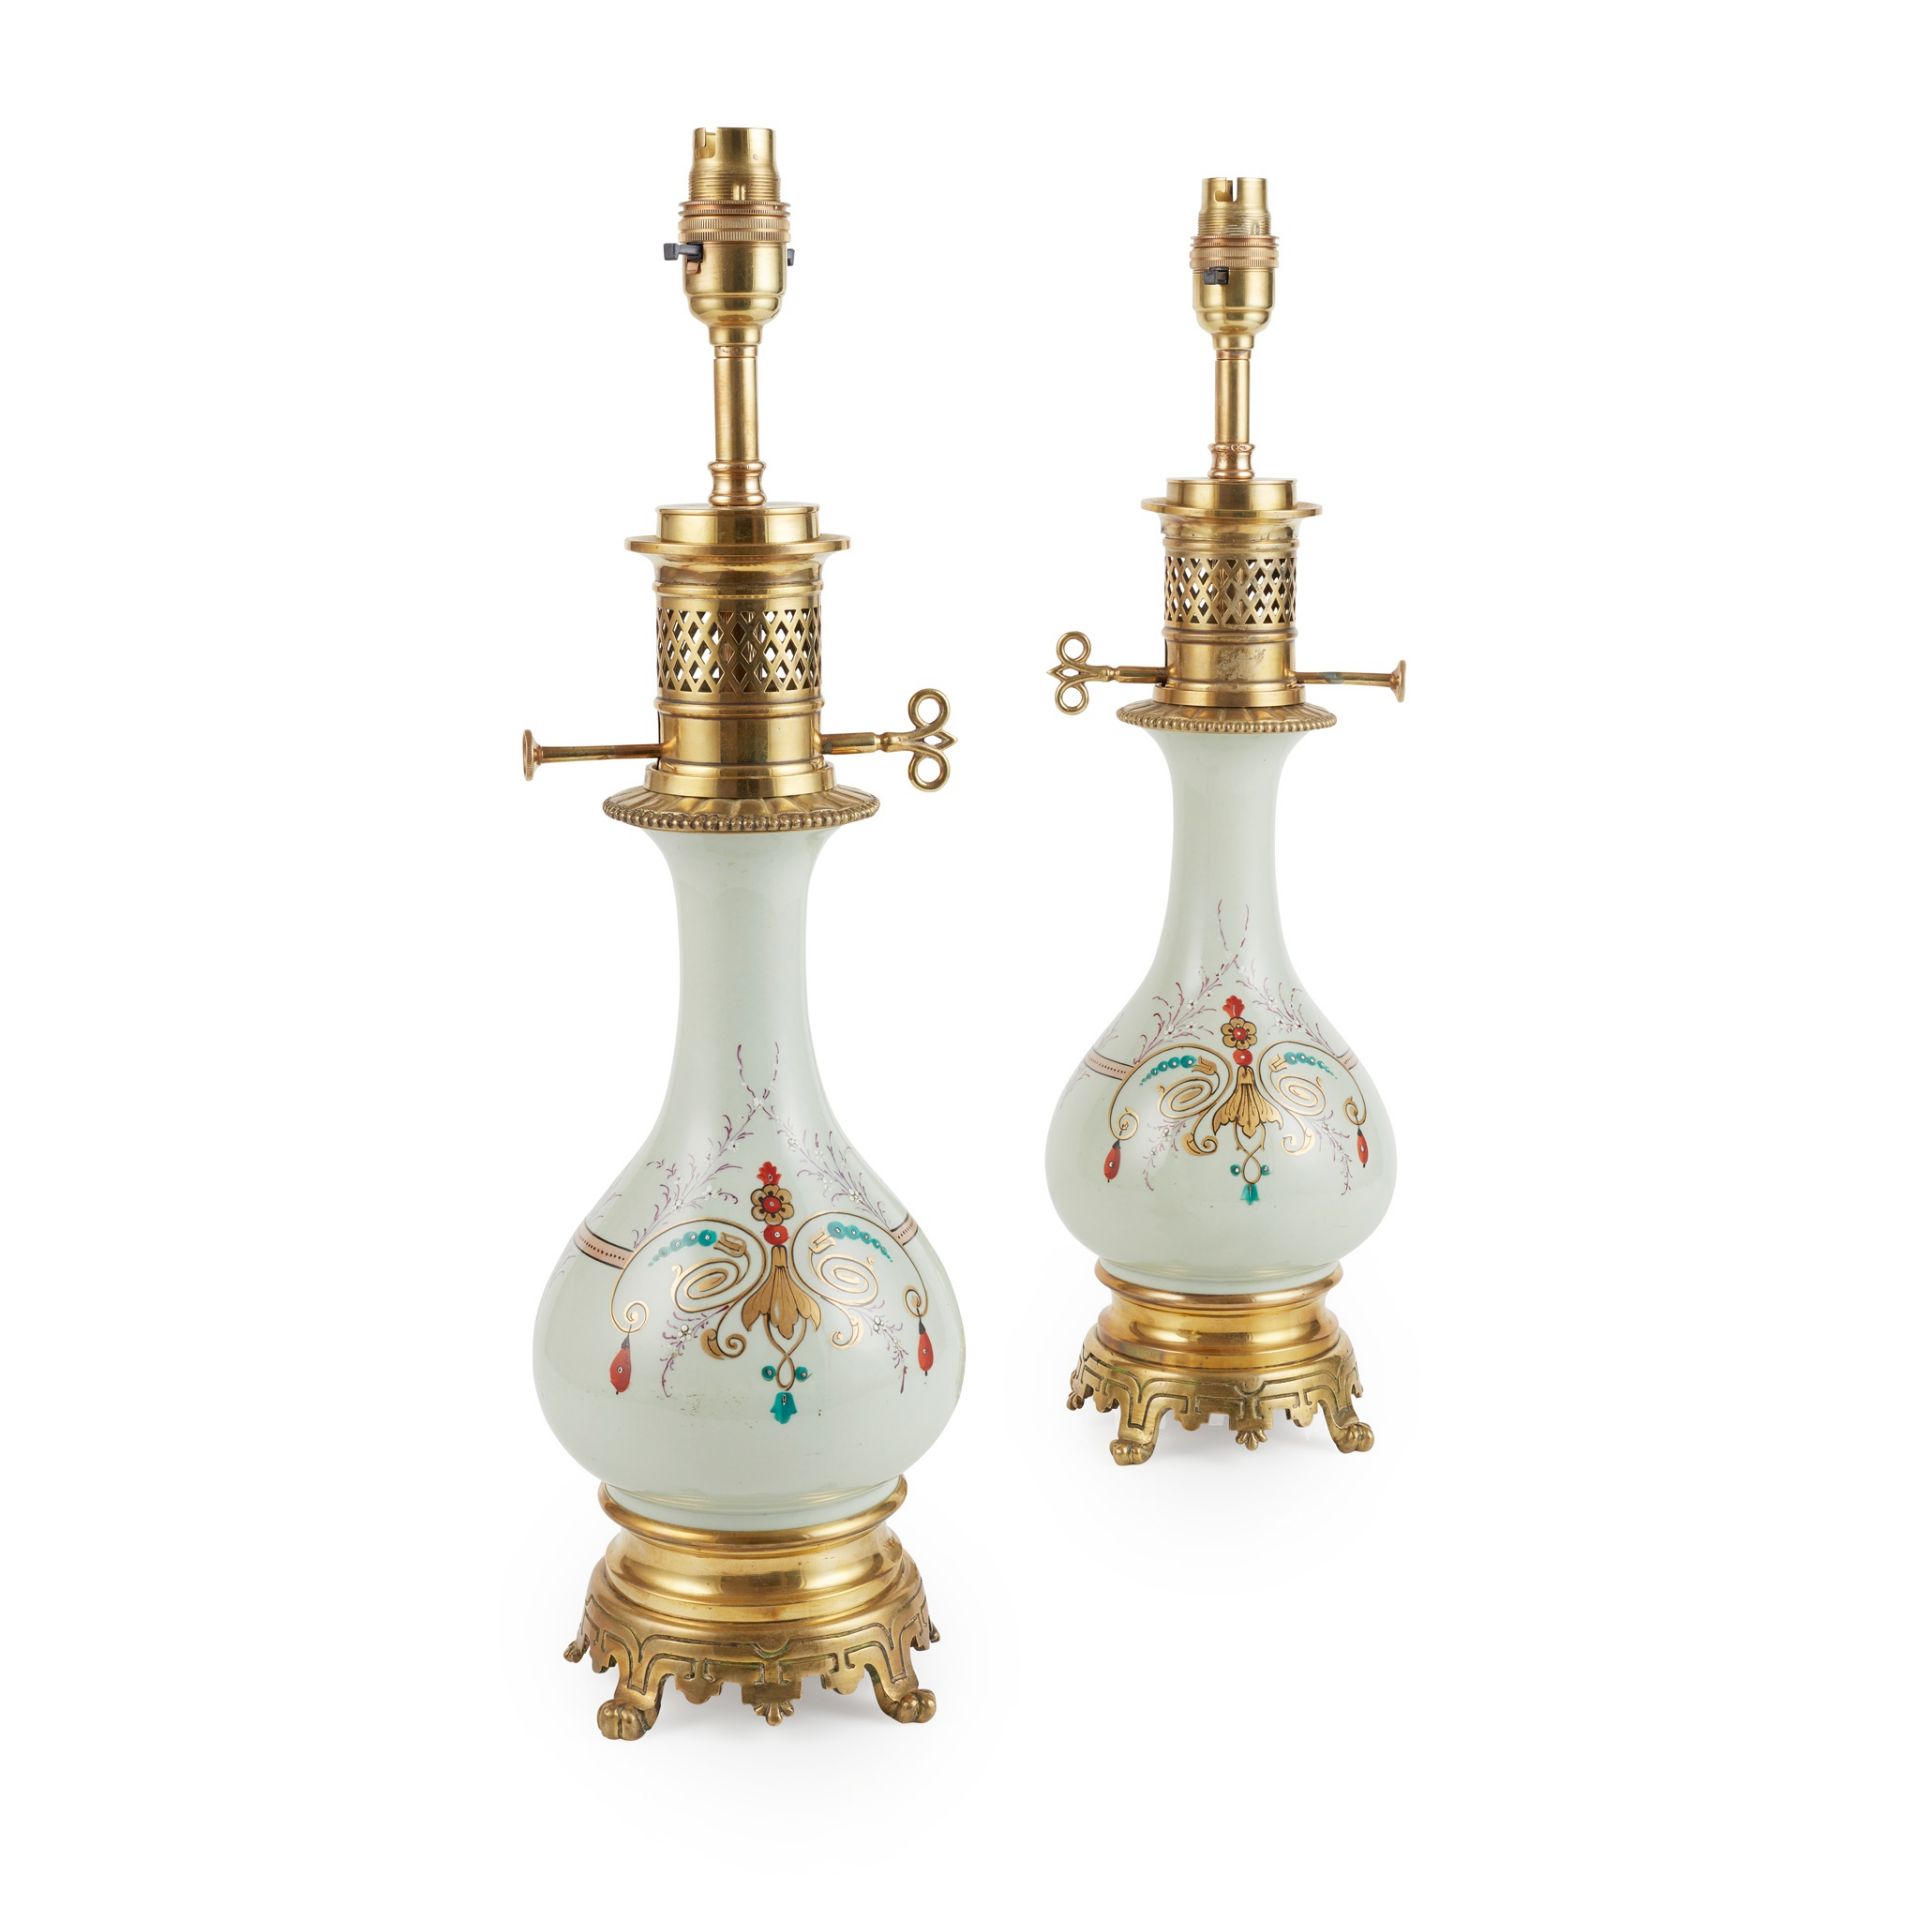 PAIR OF CELADON GLAZED AND GILT METAL LAMPS 19TH CENTURY - Image 2 of 2